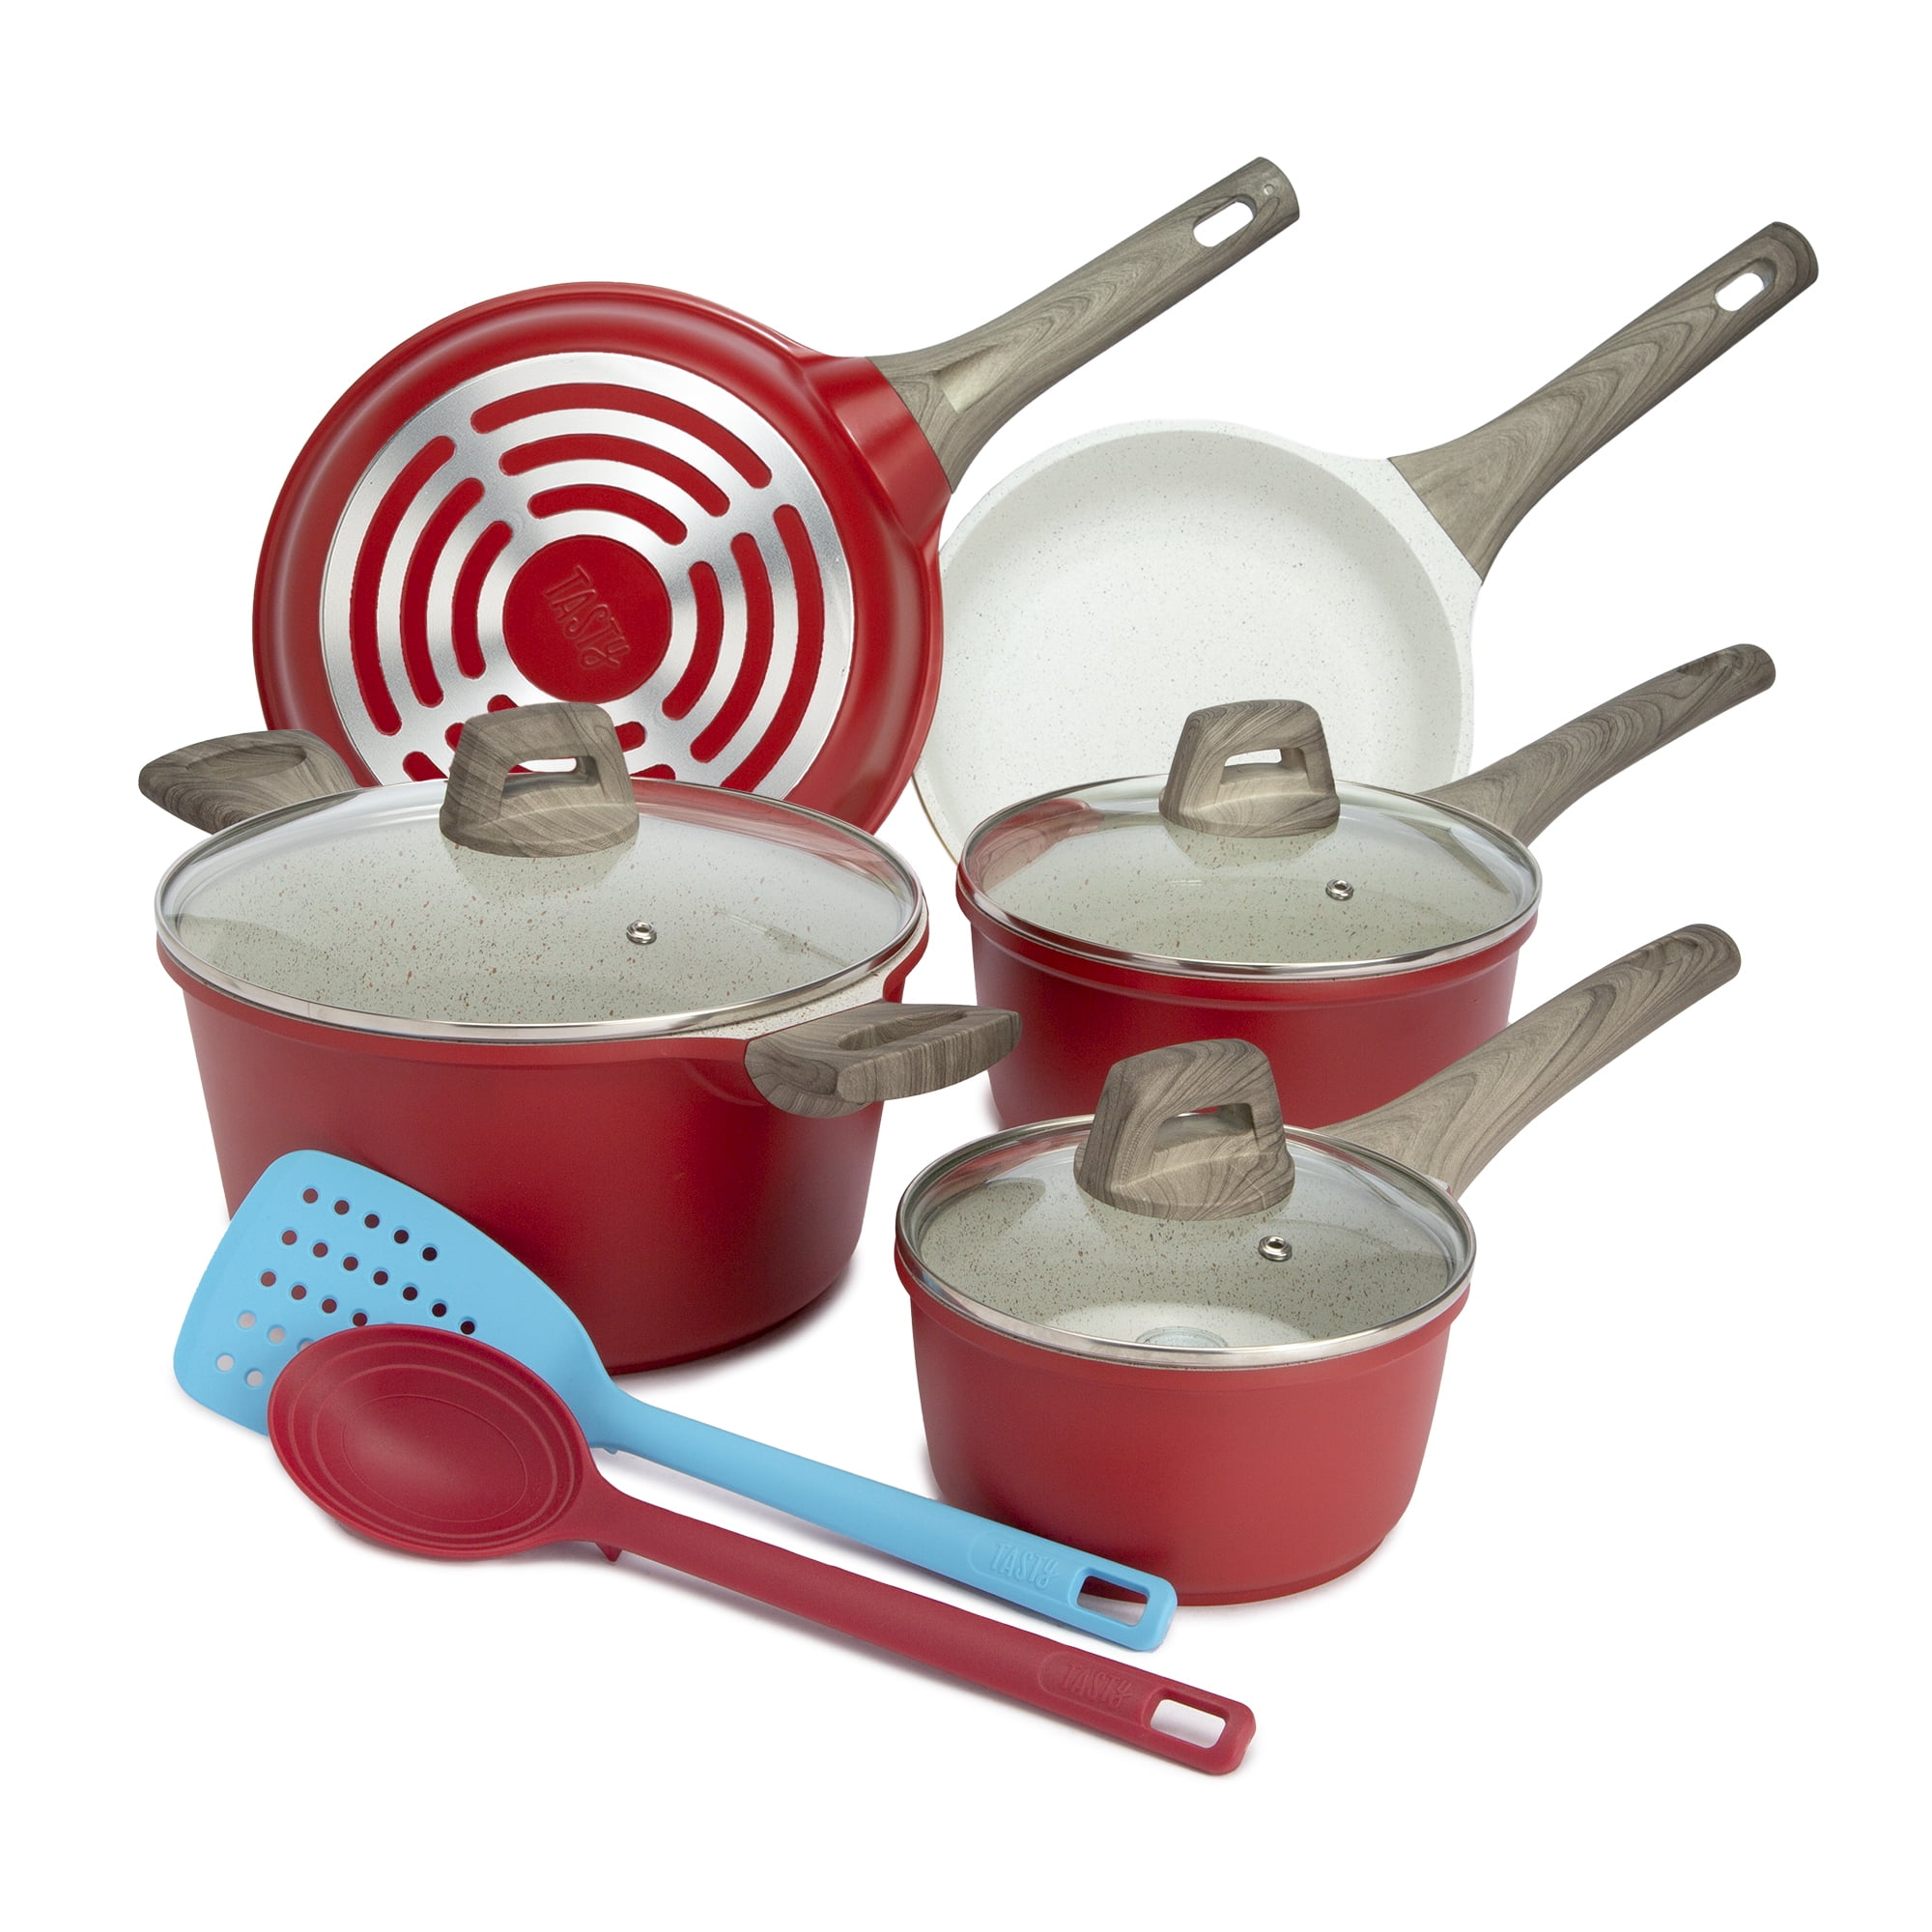 Let me tell you about my new cookware set! It's from the brand Sensart, Cookware